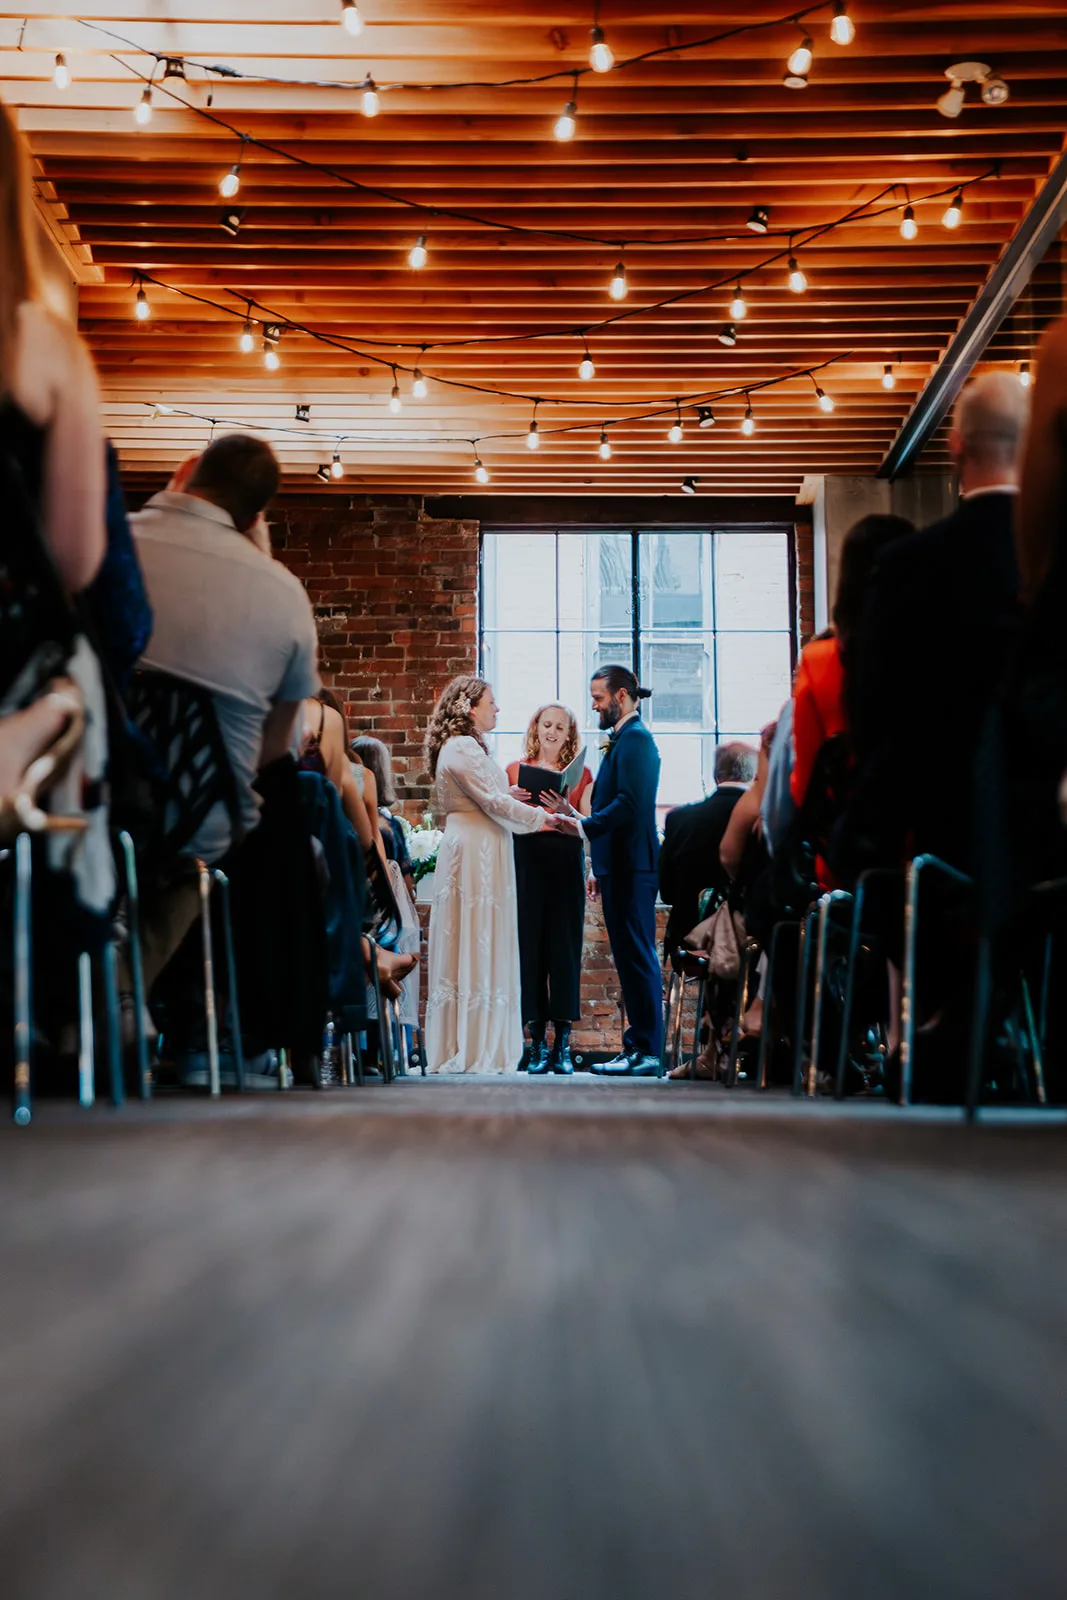 Young Hip & Married Vancouver wedding ceremony at L'Abattoir with Officiant Jane Halton